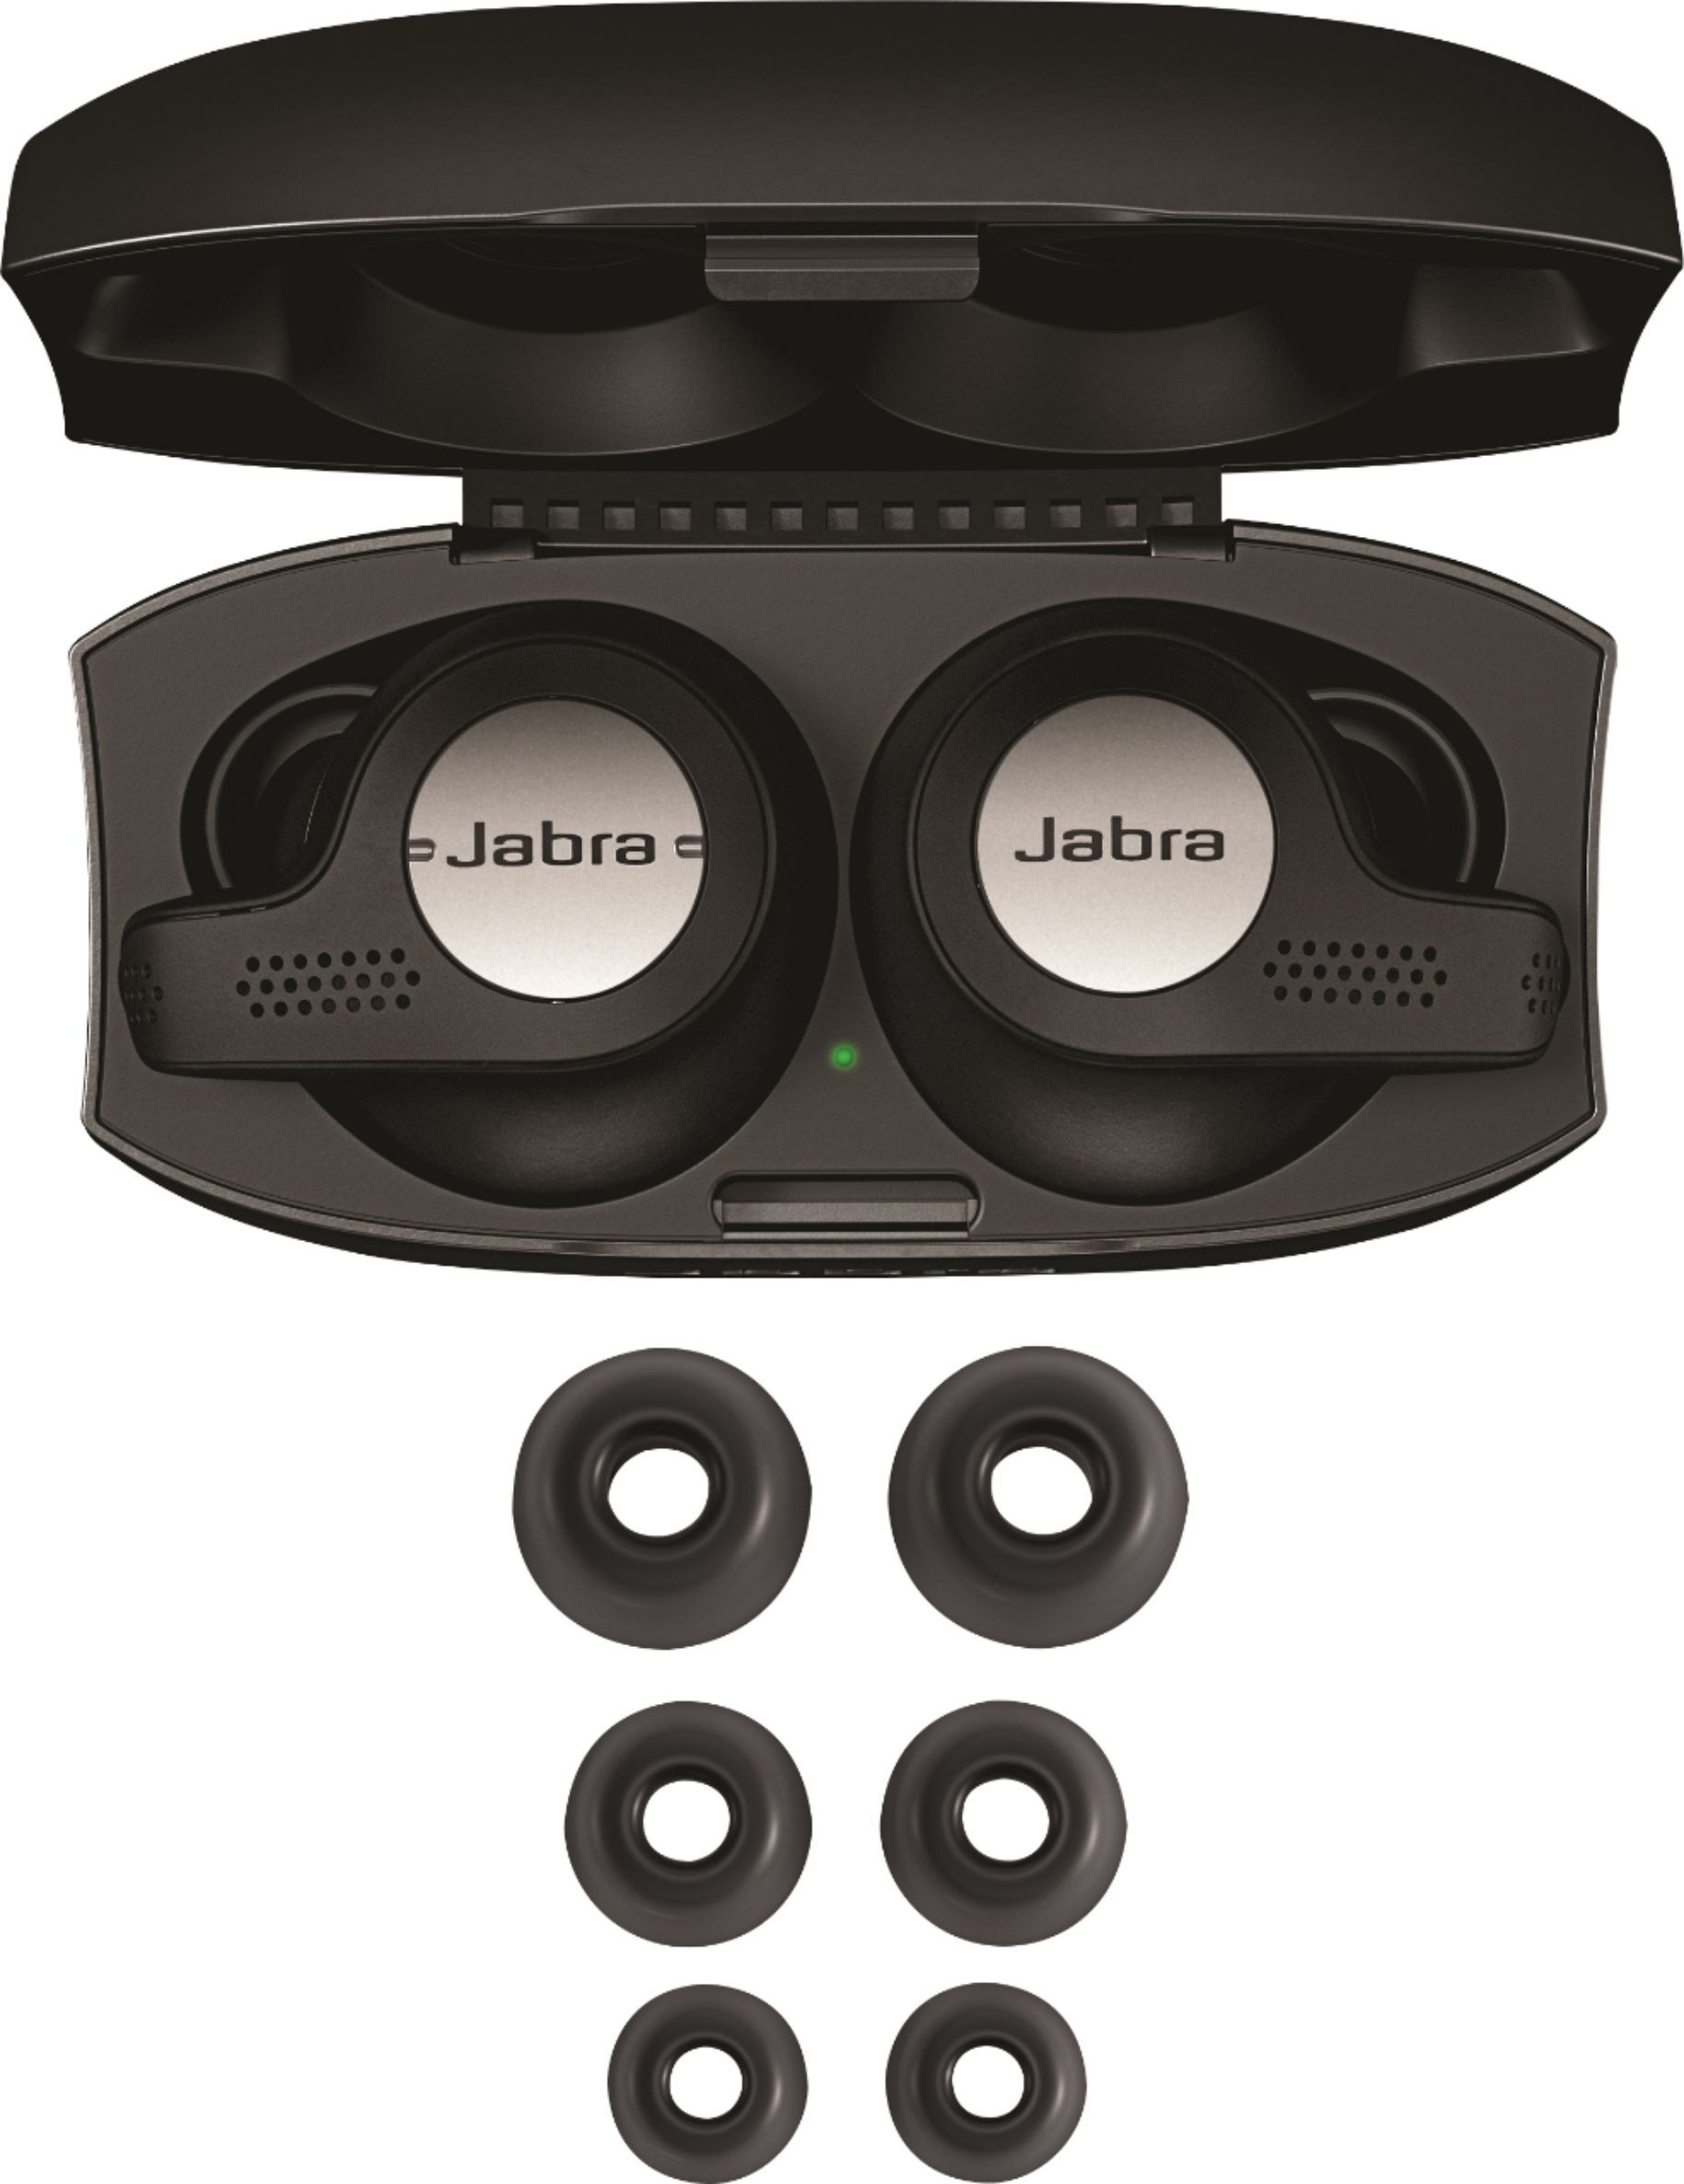 Jabra&#039;s Elite Active 65t earbuds are almost half price for a limited time